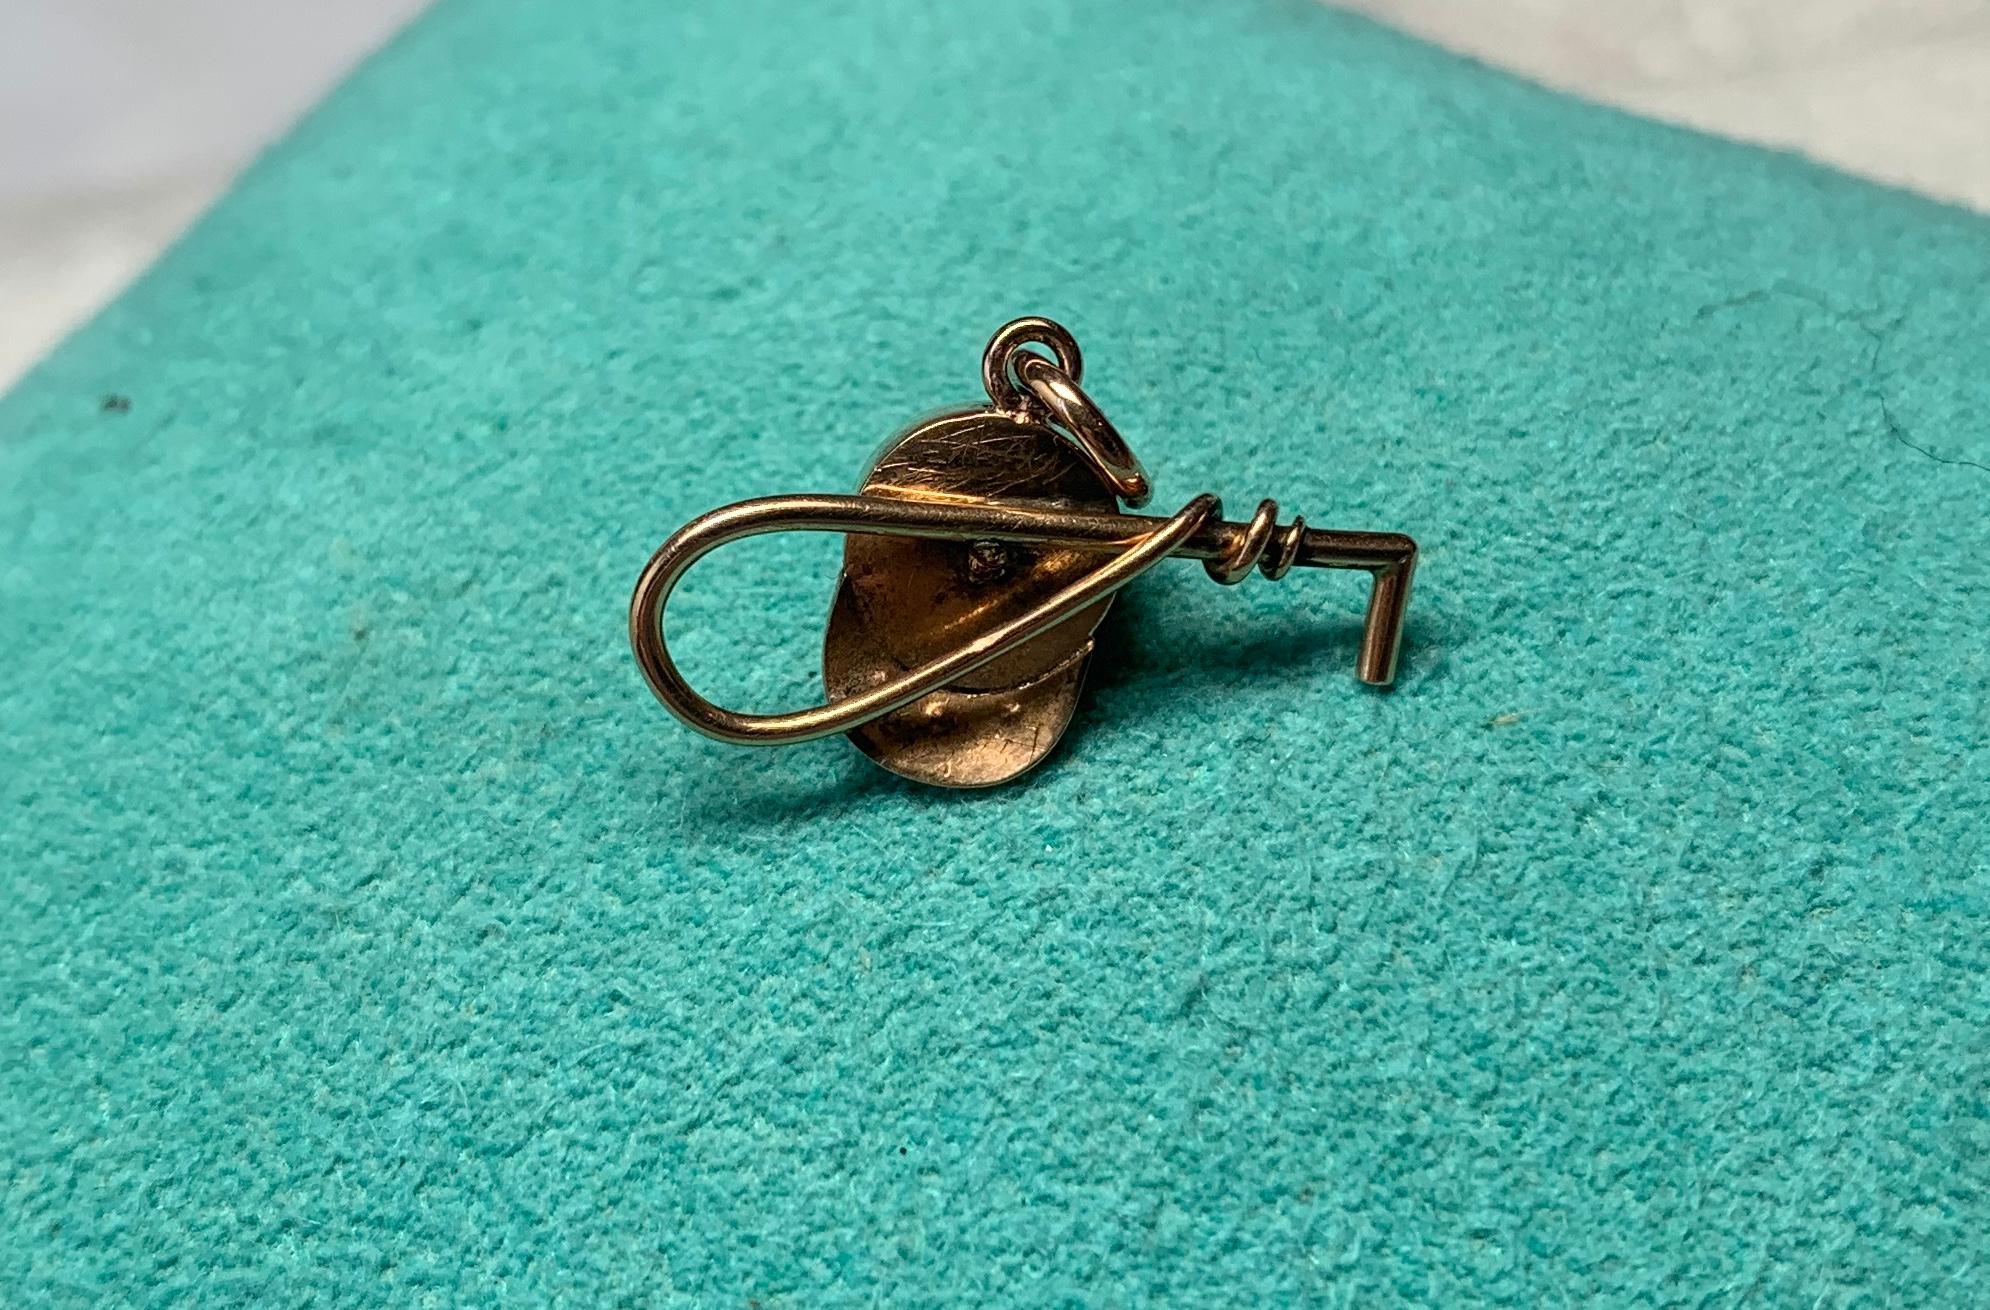 Horse Equestrian Hat Crop Garnet 14K Pearl Charm Pendant Necklace Hunting Riding In Excellent Condition For Sale In New York, NY